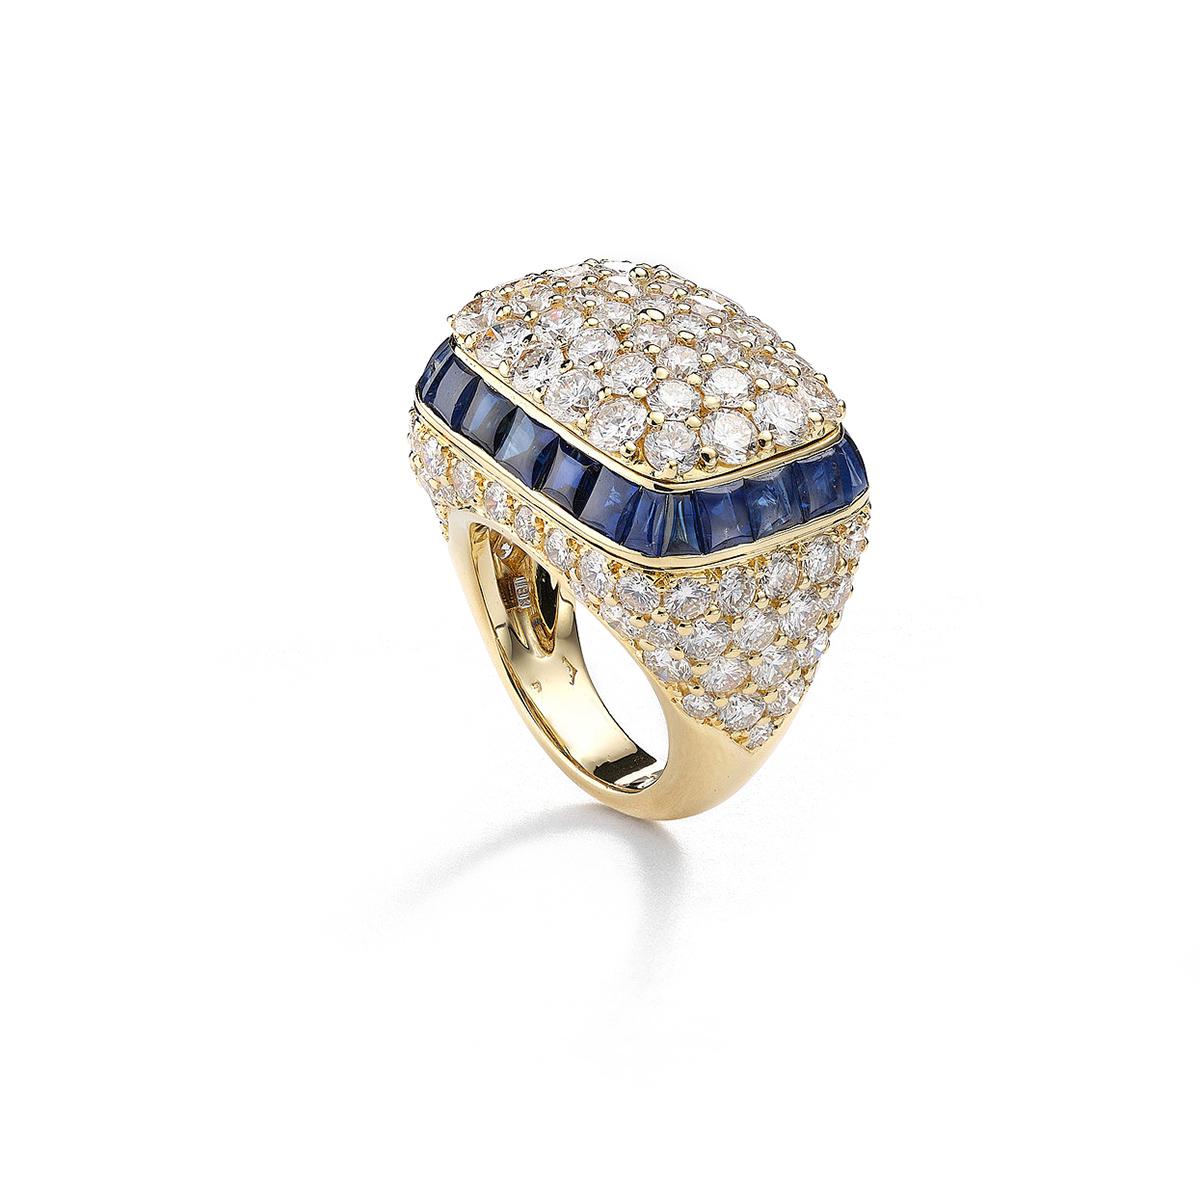 Ring in 18kt yellow gold set with diamond and sapphires Size 53